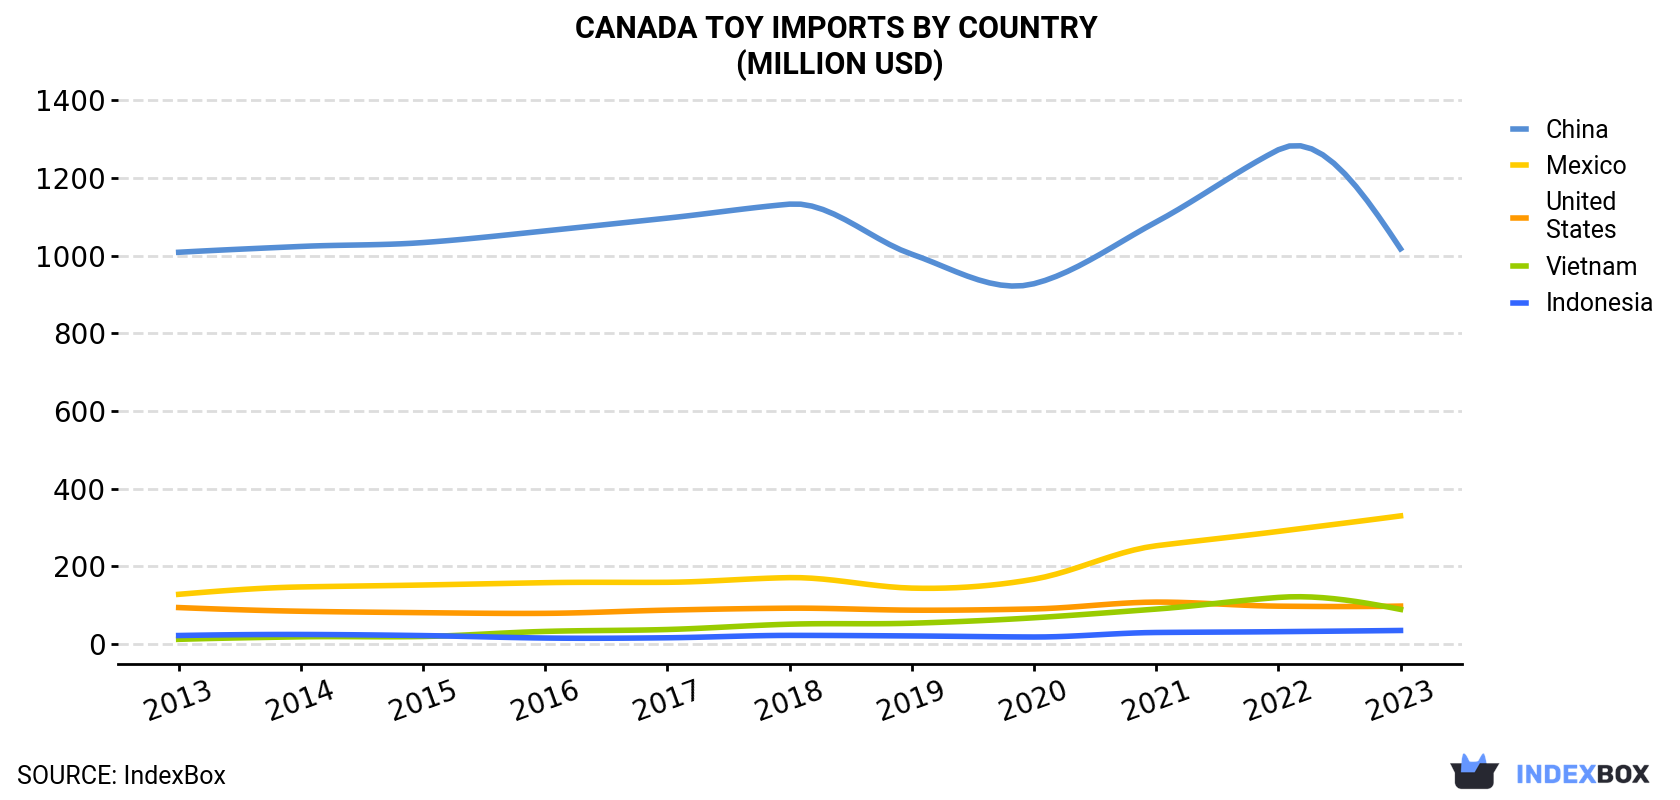 Canada Toy Imports By Country (Million USD)